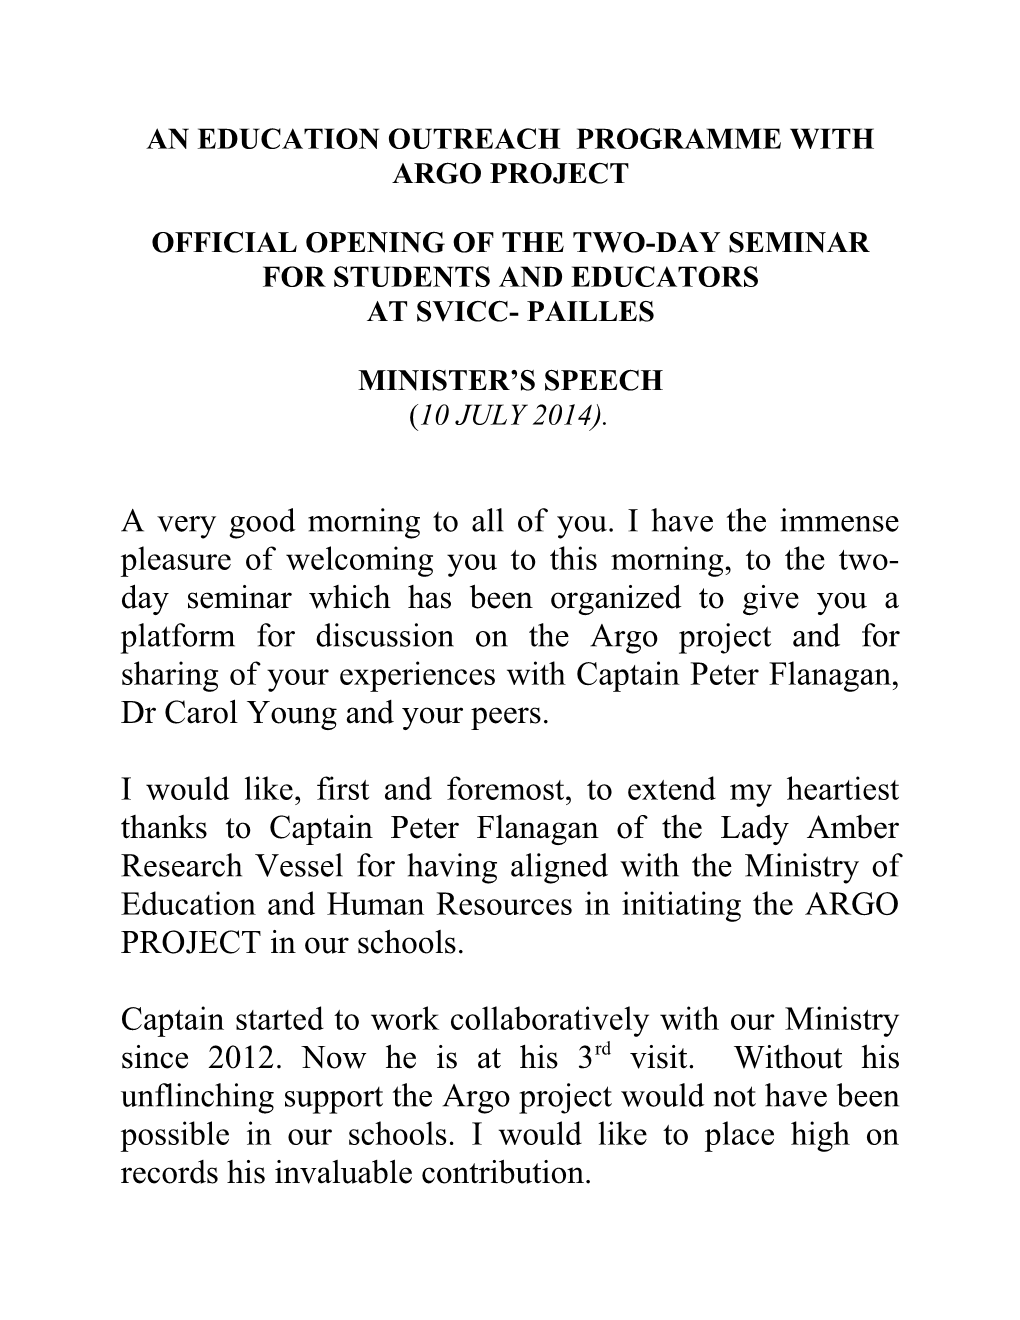 An Education Outreach Programme with Argo Project